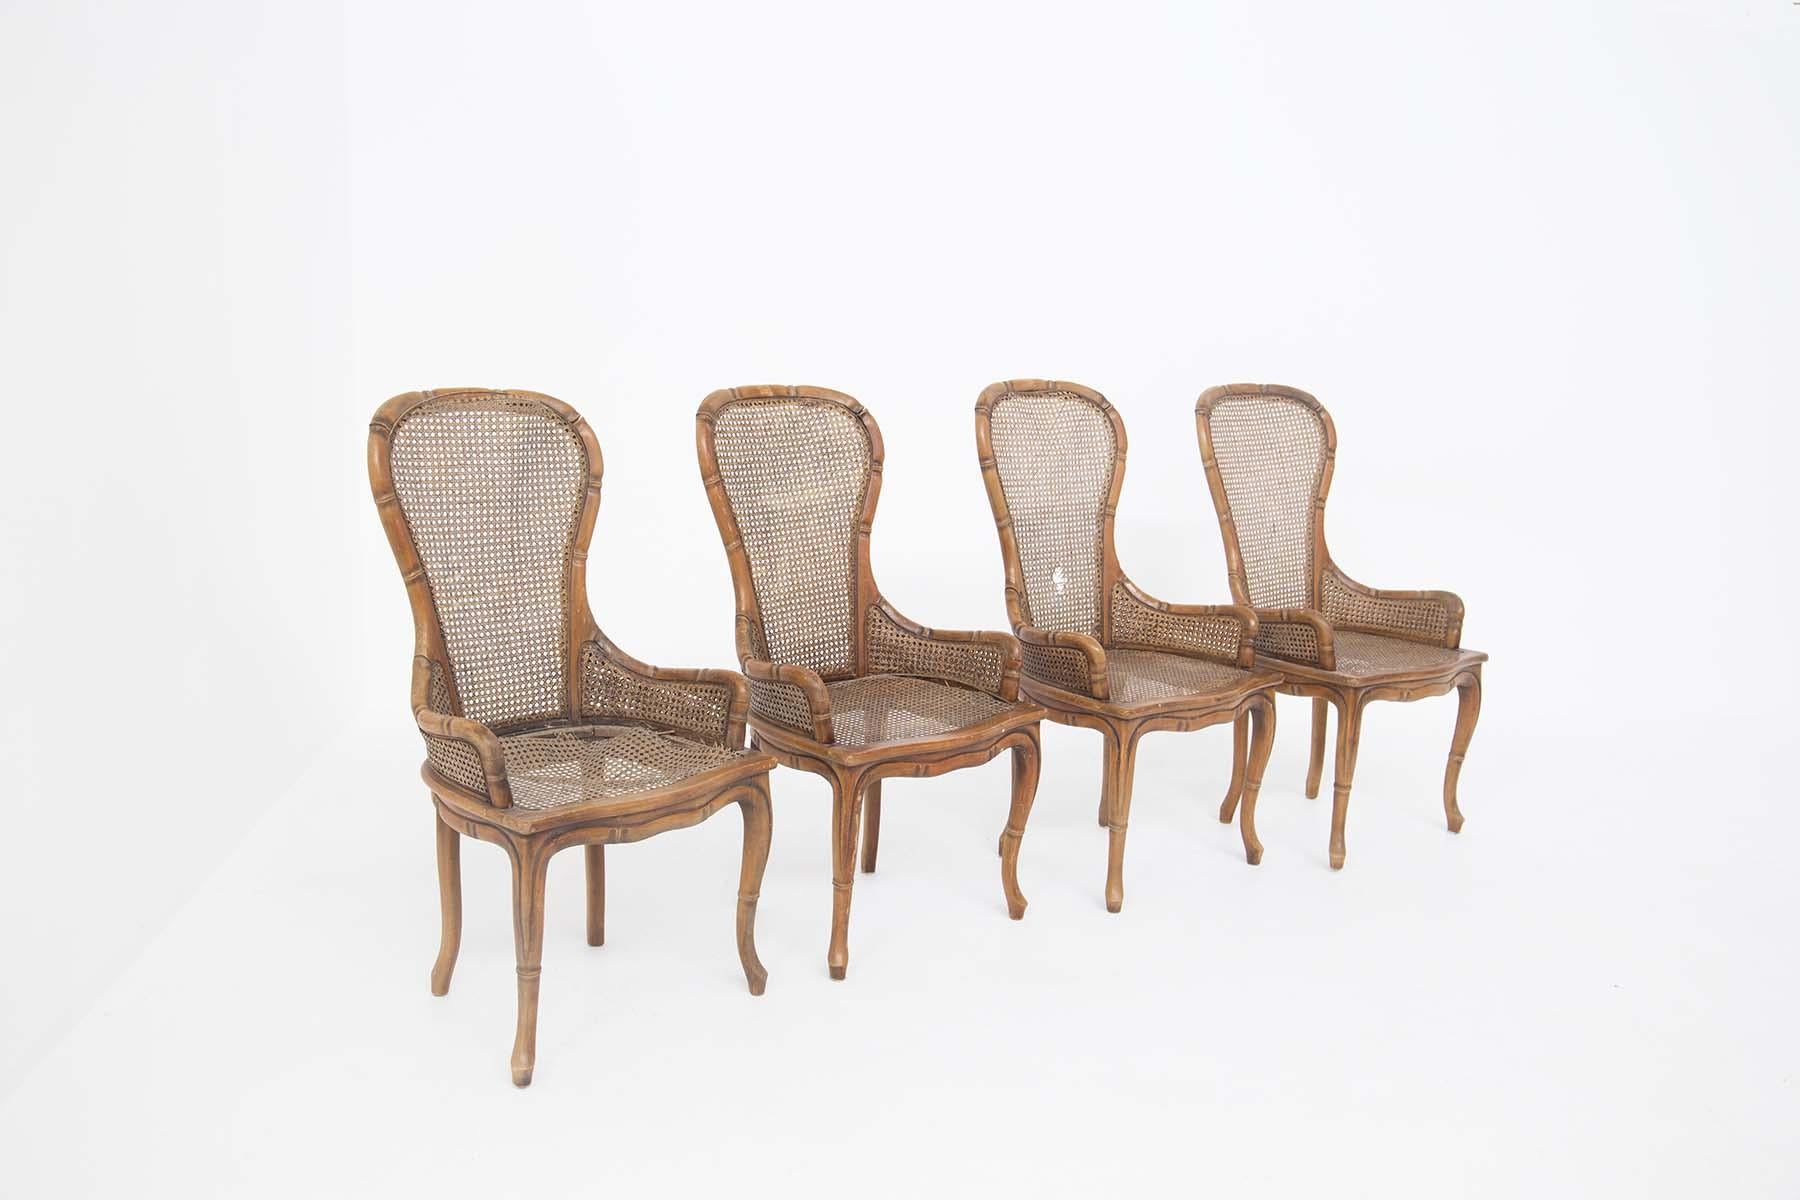 Set of four faux bamboo chairs made by Giorgetti in the 1980s. The seat and back are made of rattan. The structure is made of wood but through its realization technique similar to a bamboo cane, the armchair seems to become an exotic piece of